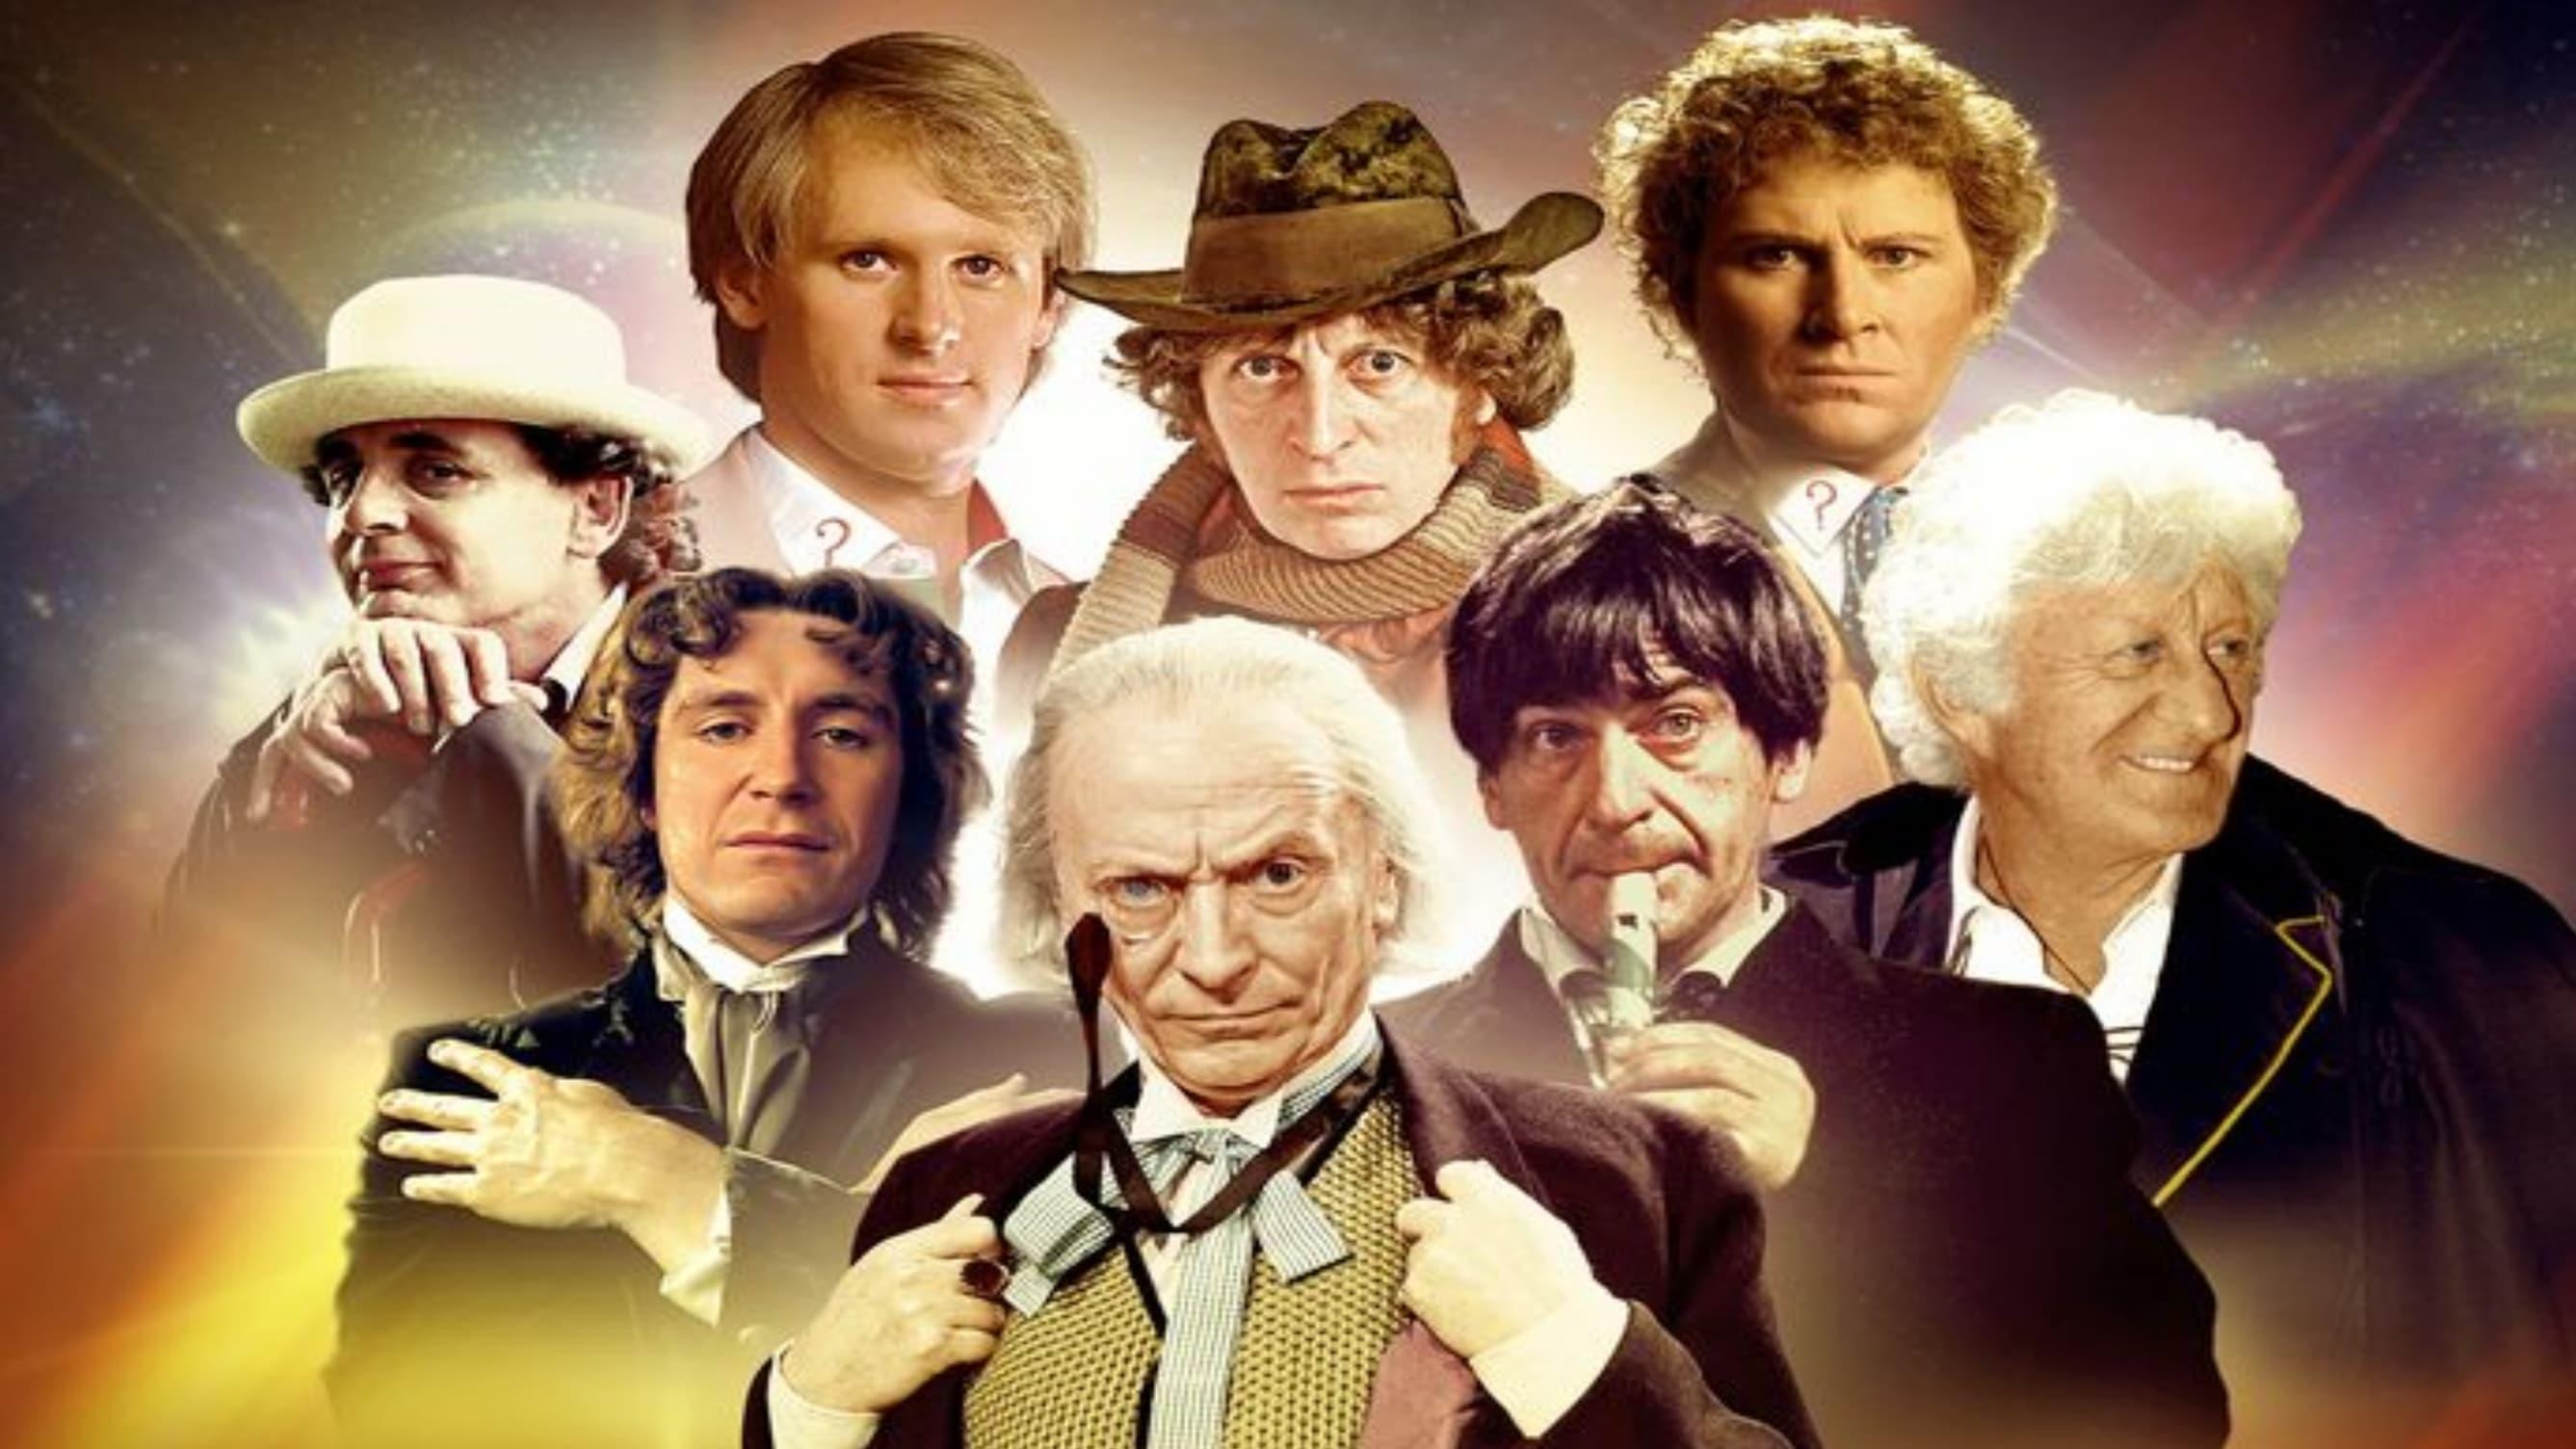 The Doctors: The Peter Davison Years backdrop